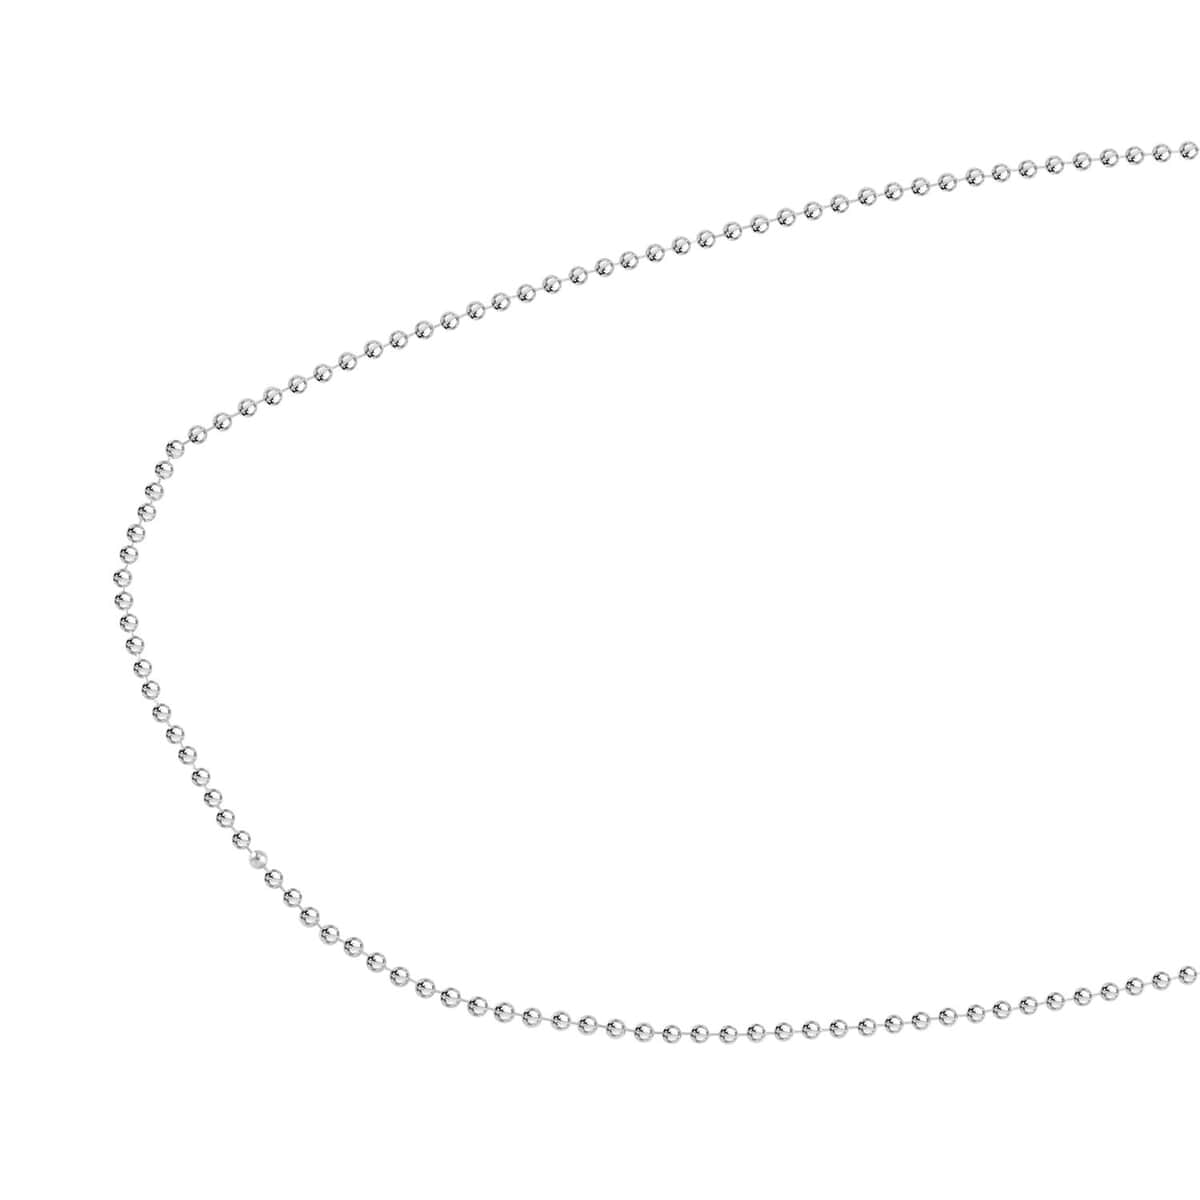 Buy 950 Platinum Electroform Beaded Link Chain Necklace 20 Inches 4.35 ...